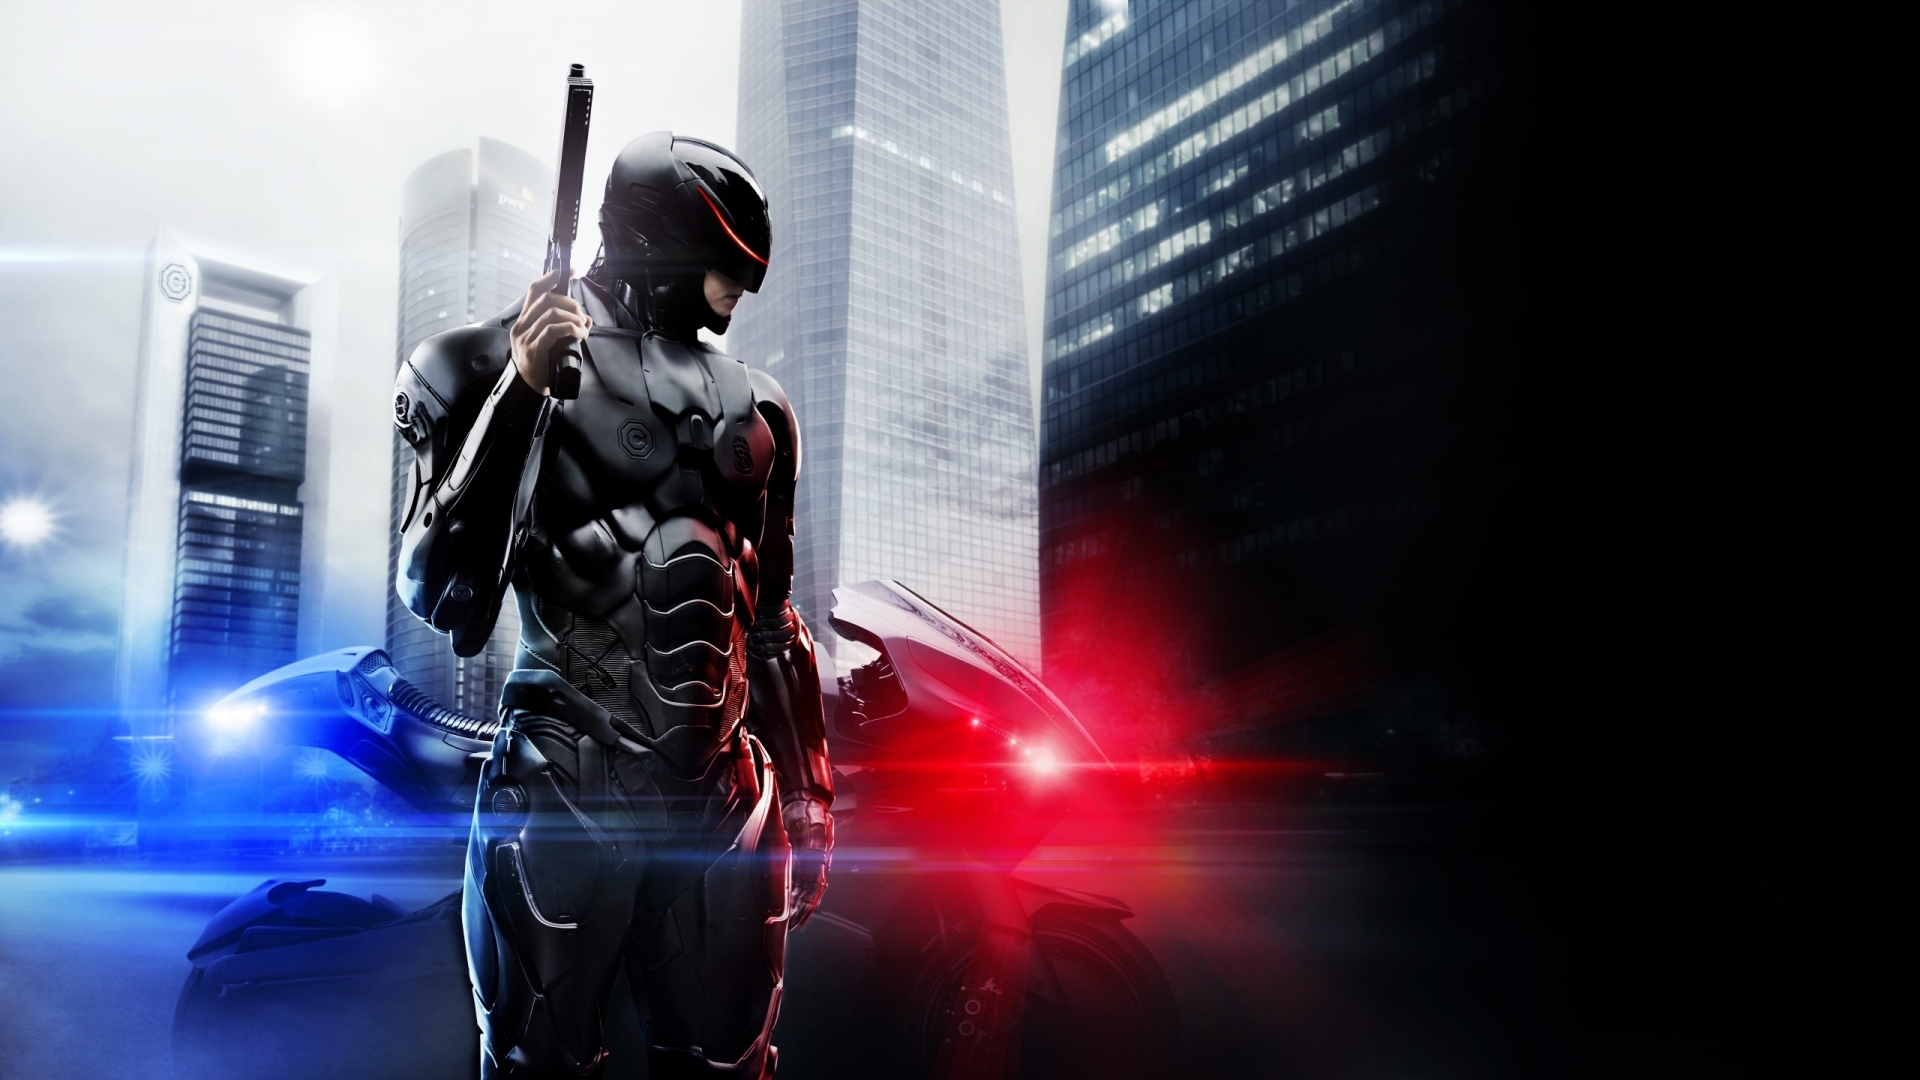 2014 Robocop Poster for 1920 x 1080 HDTV 1080p resolution